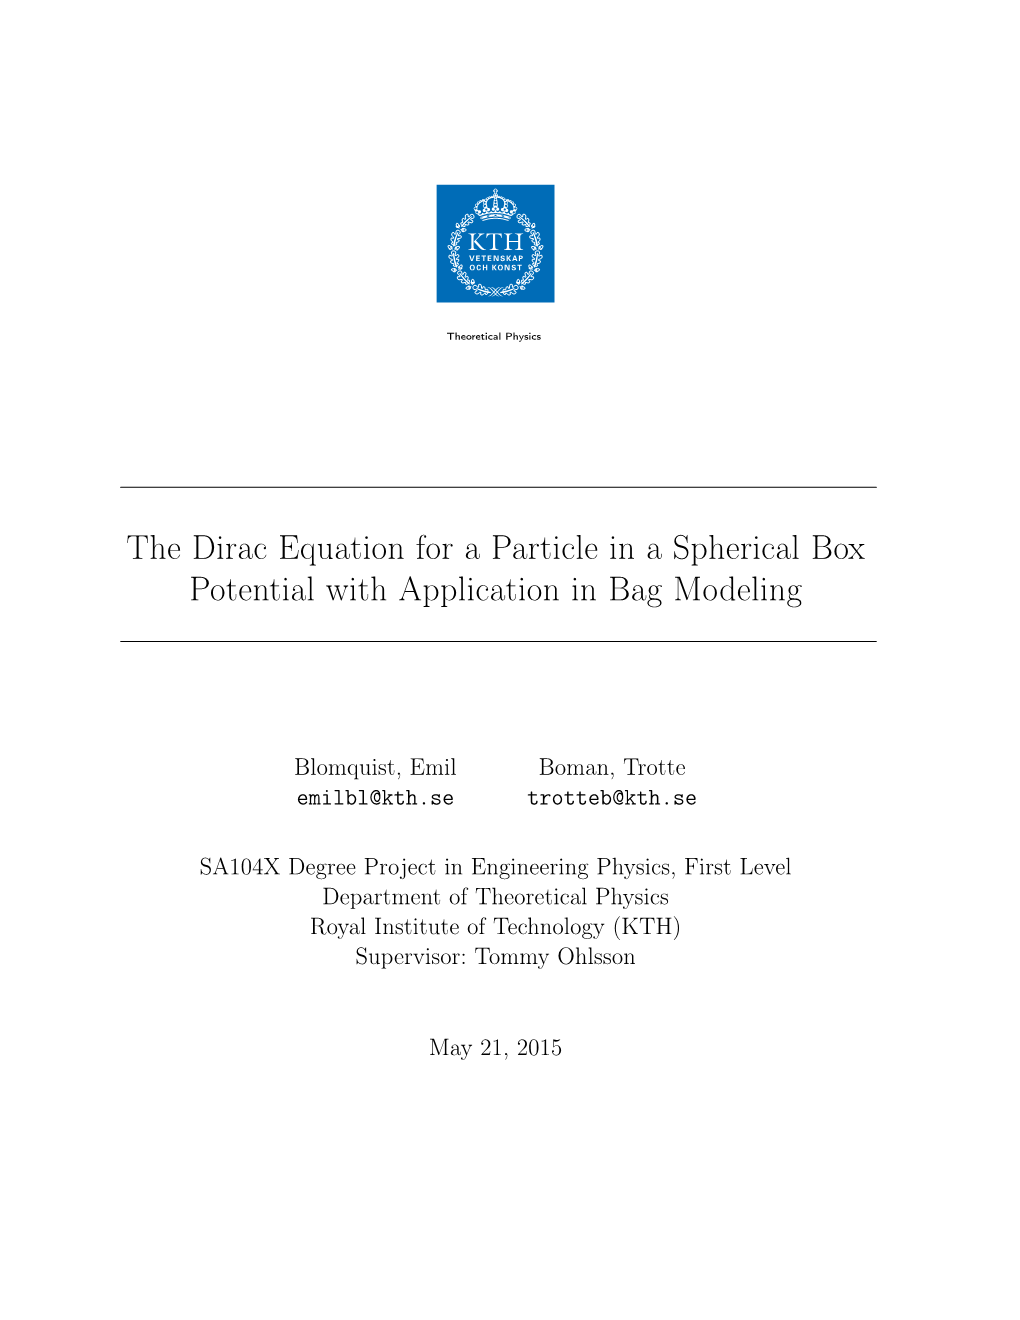 The Dirac Equation for a Particle in a Spherical Box Potential with Application in Bag Modeling